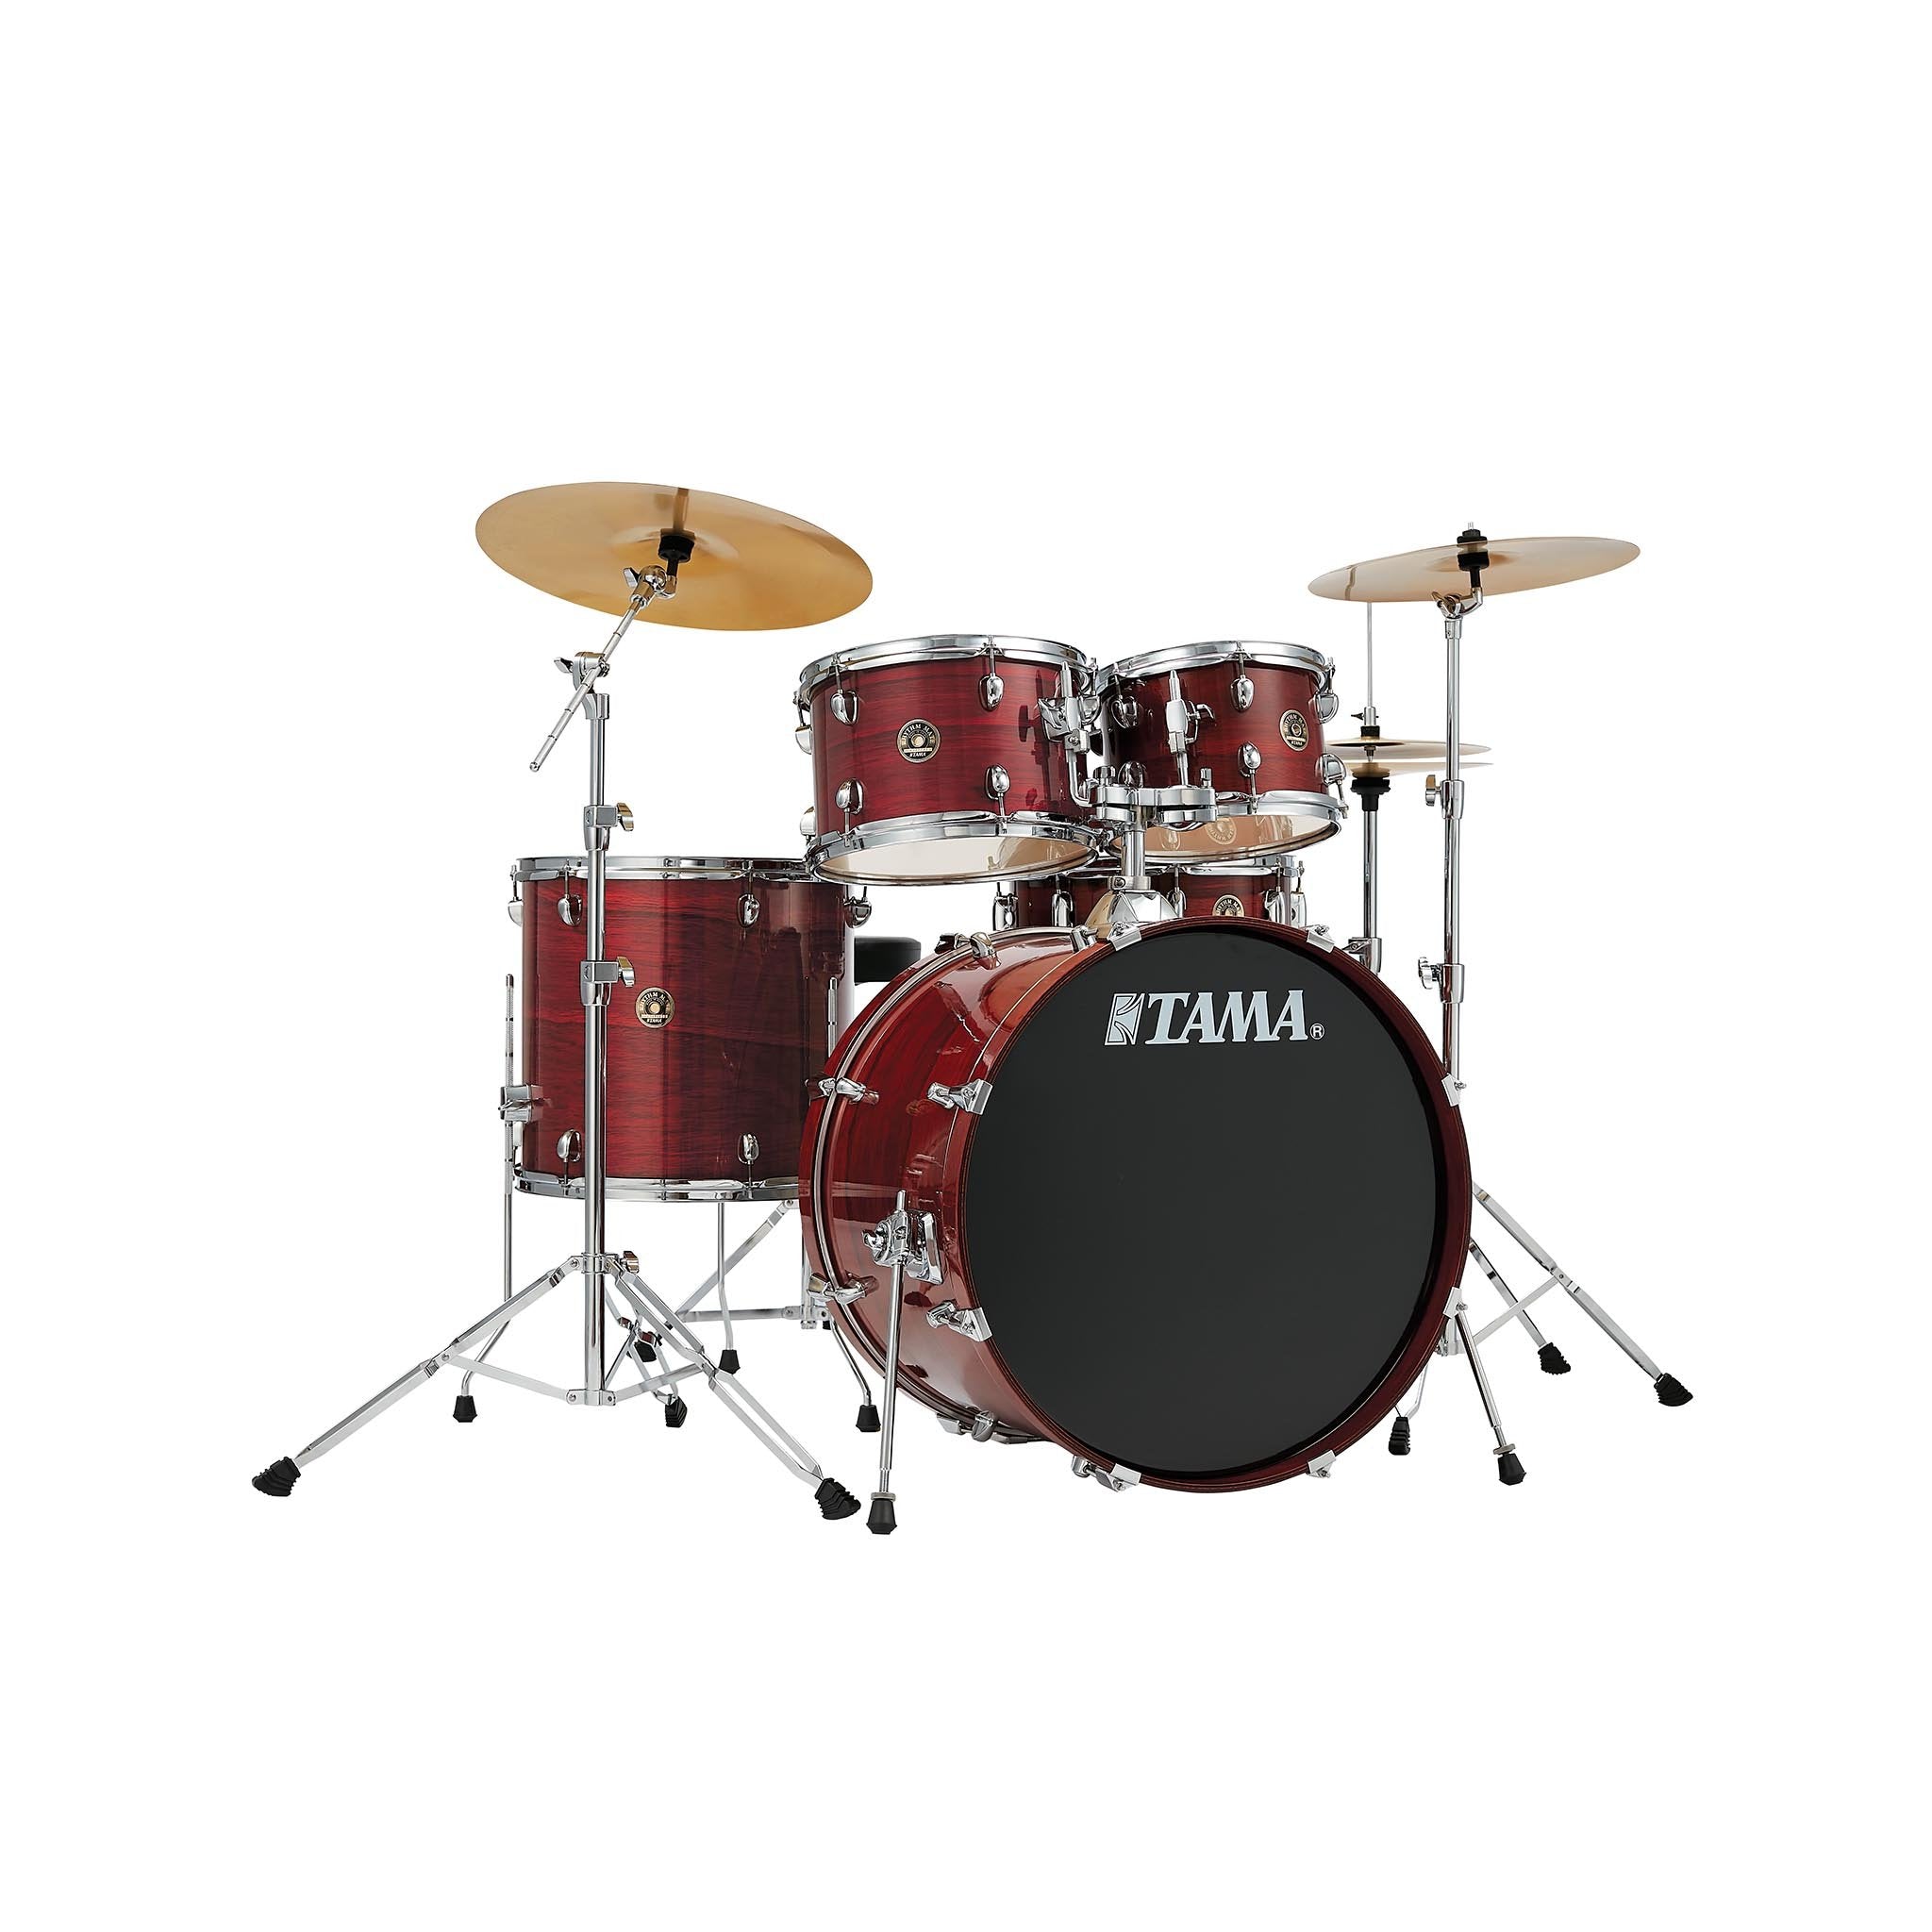 TAMA Rhythm Mate Limited Edition 5-pc Drum Set w/Hardware (Available in 3 Colors)